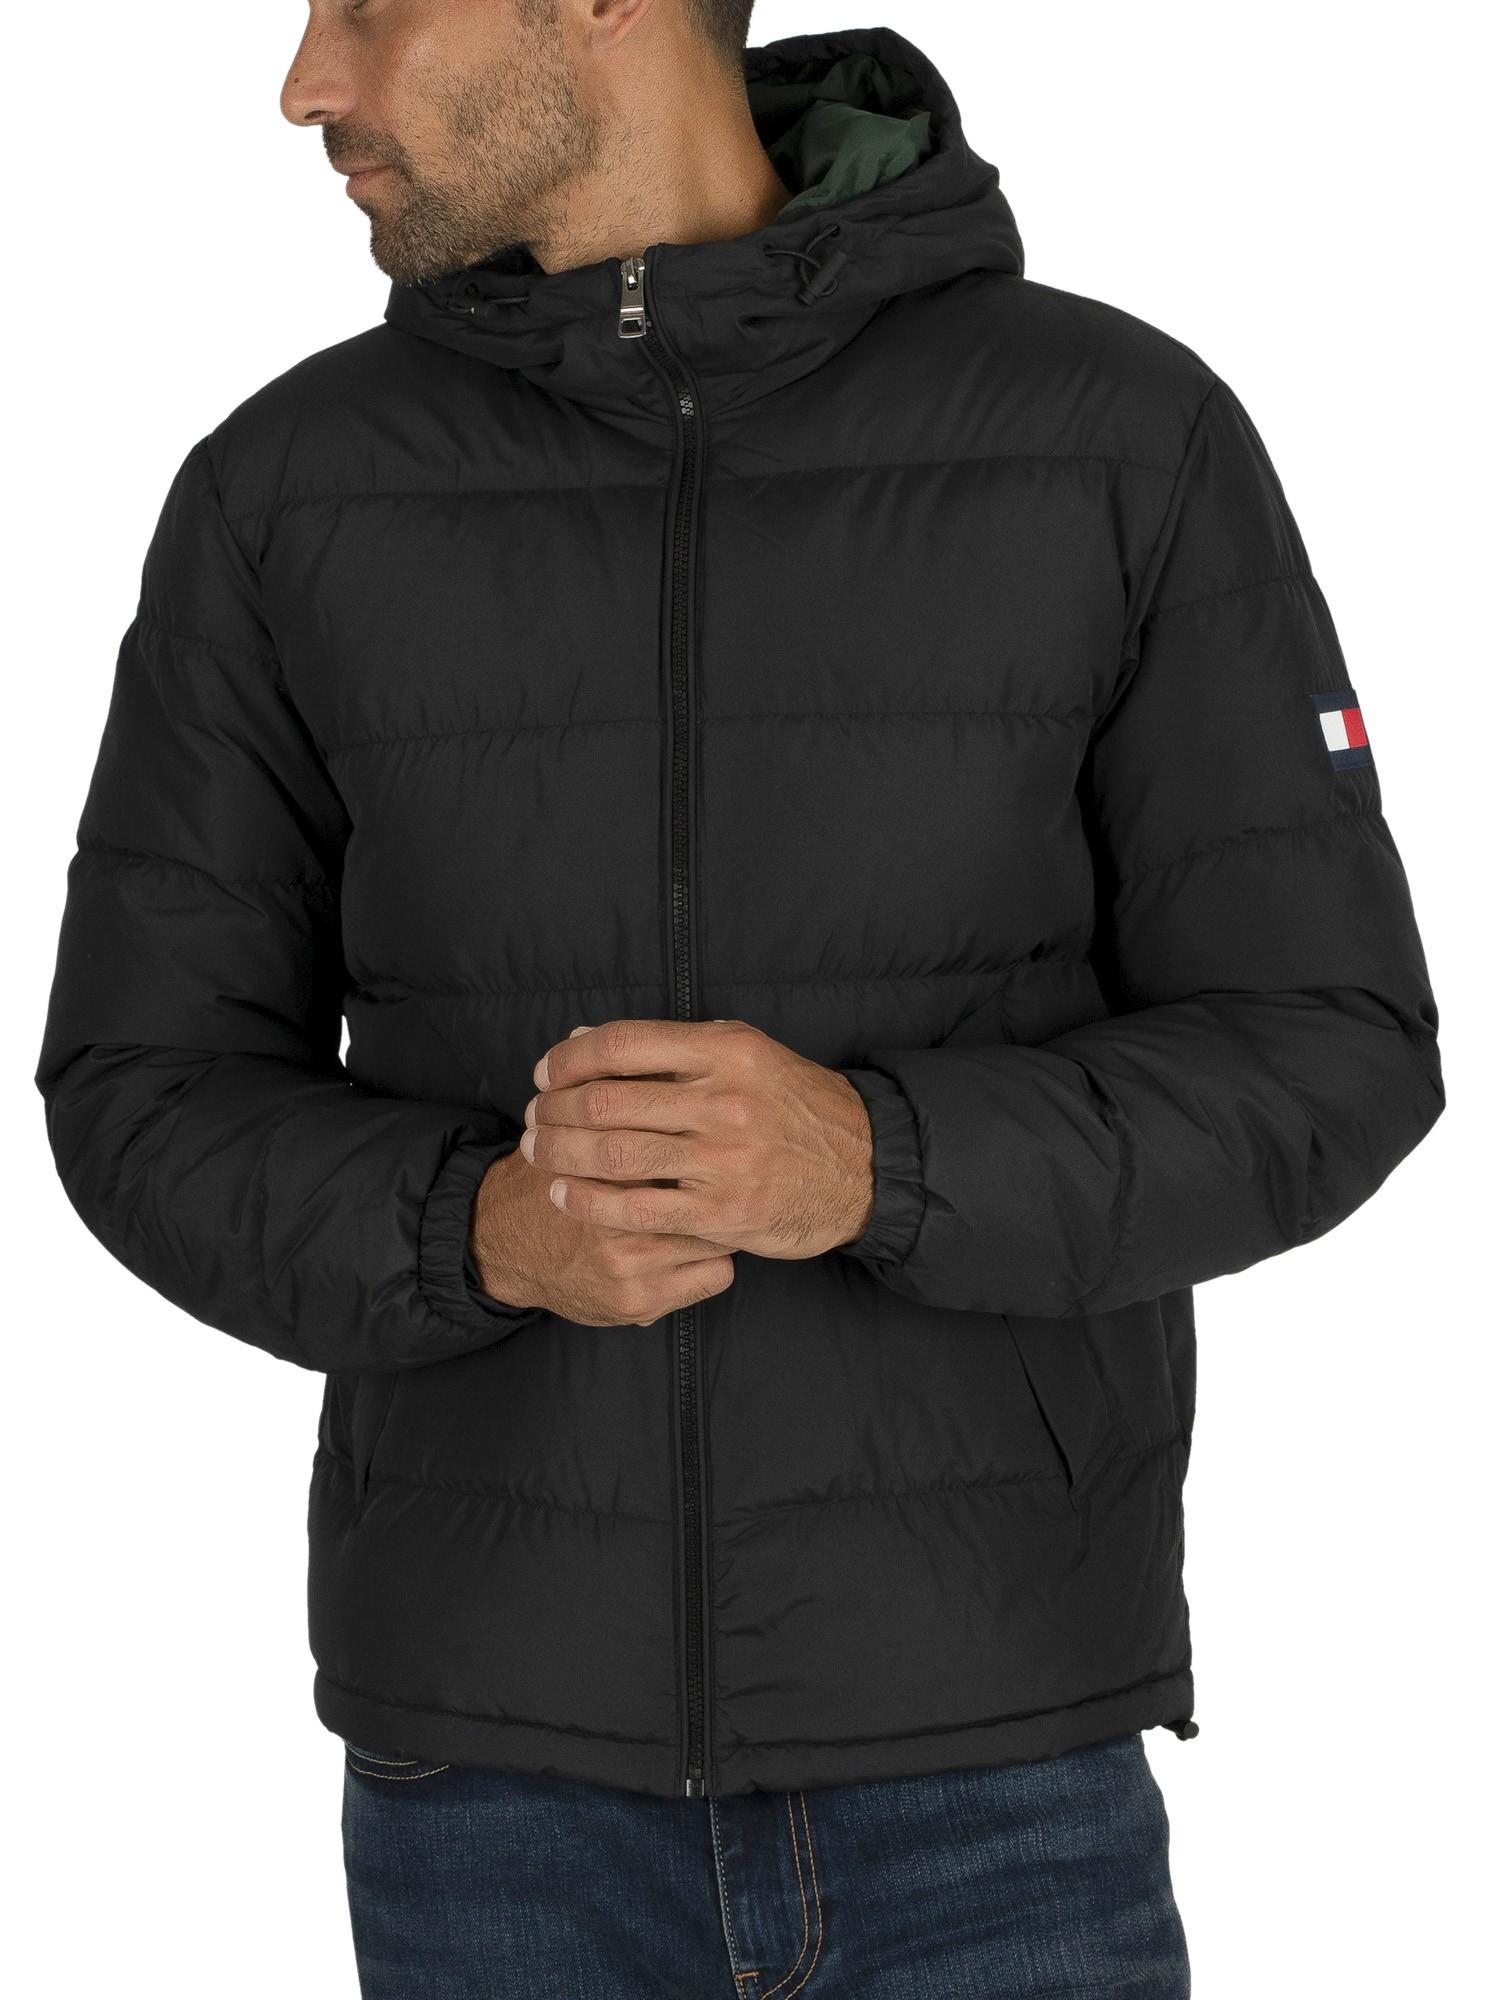 Tommy Hilfiger Synthetic Hooded Redown Bomber Jacket in Black for Men - Lyst